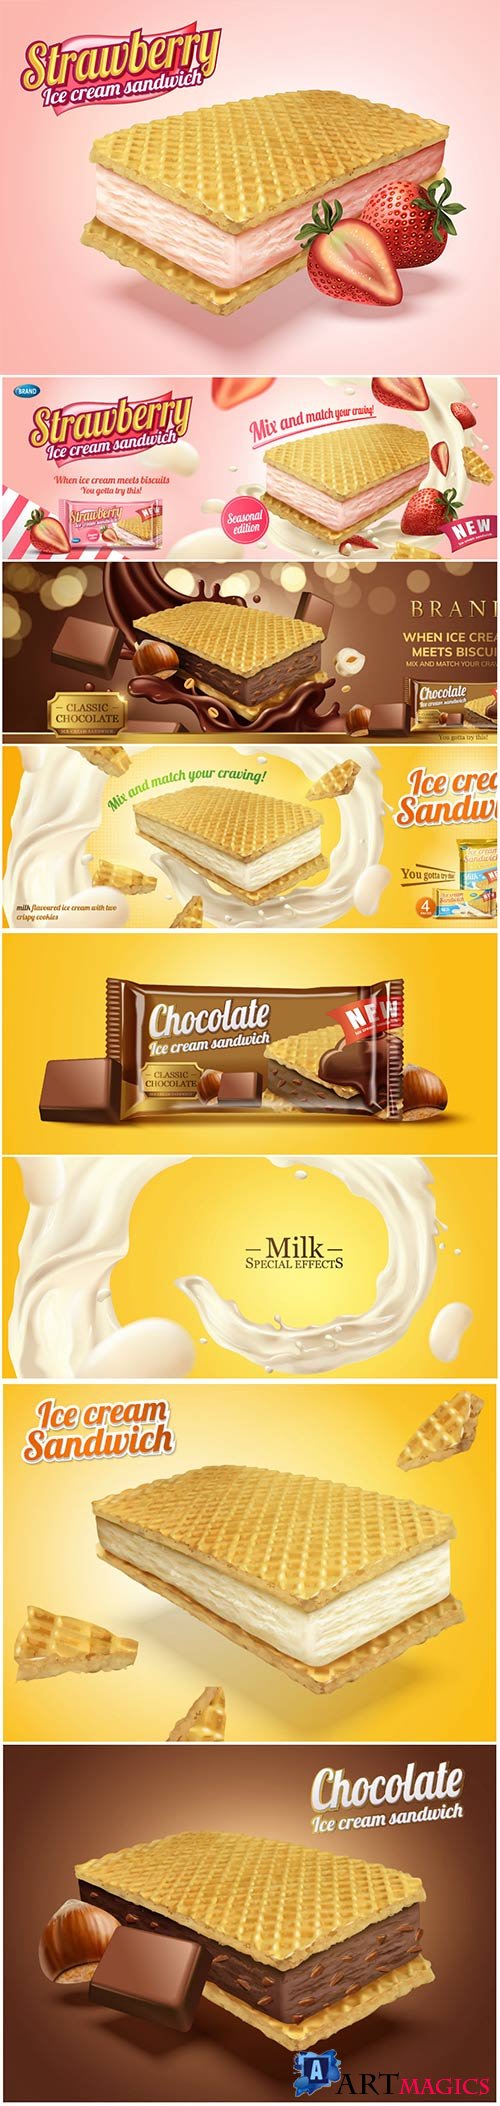 Milk flavoured ice cream sandwich with wafer cookies in 3d illustration